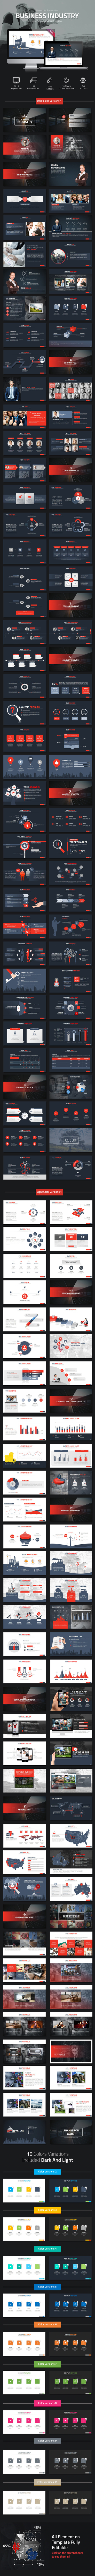 Business Industry Powerpoint Presentation